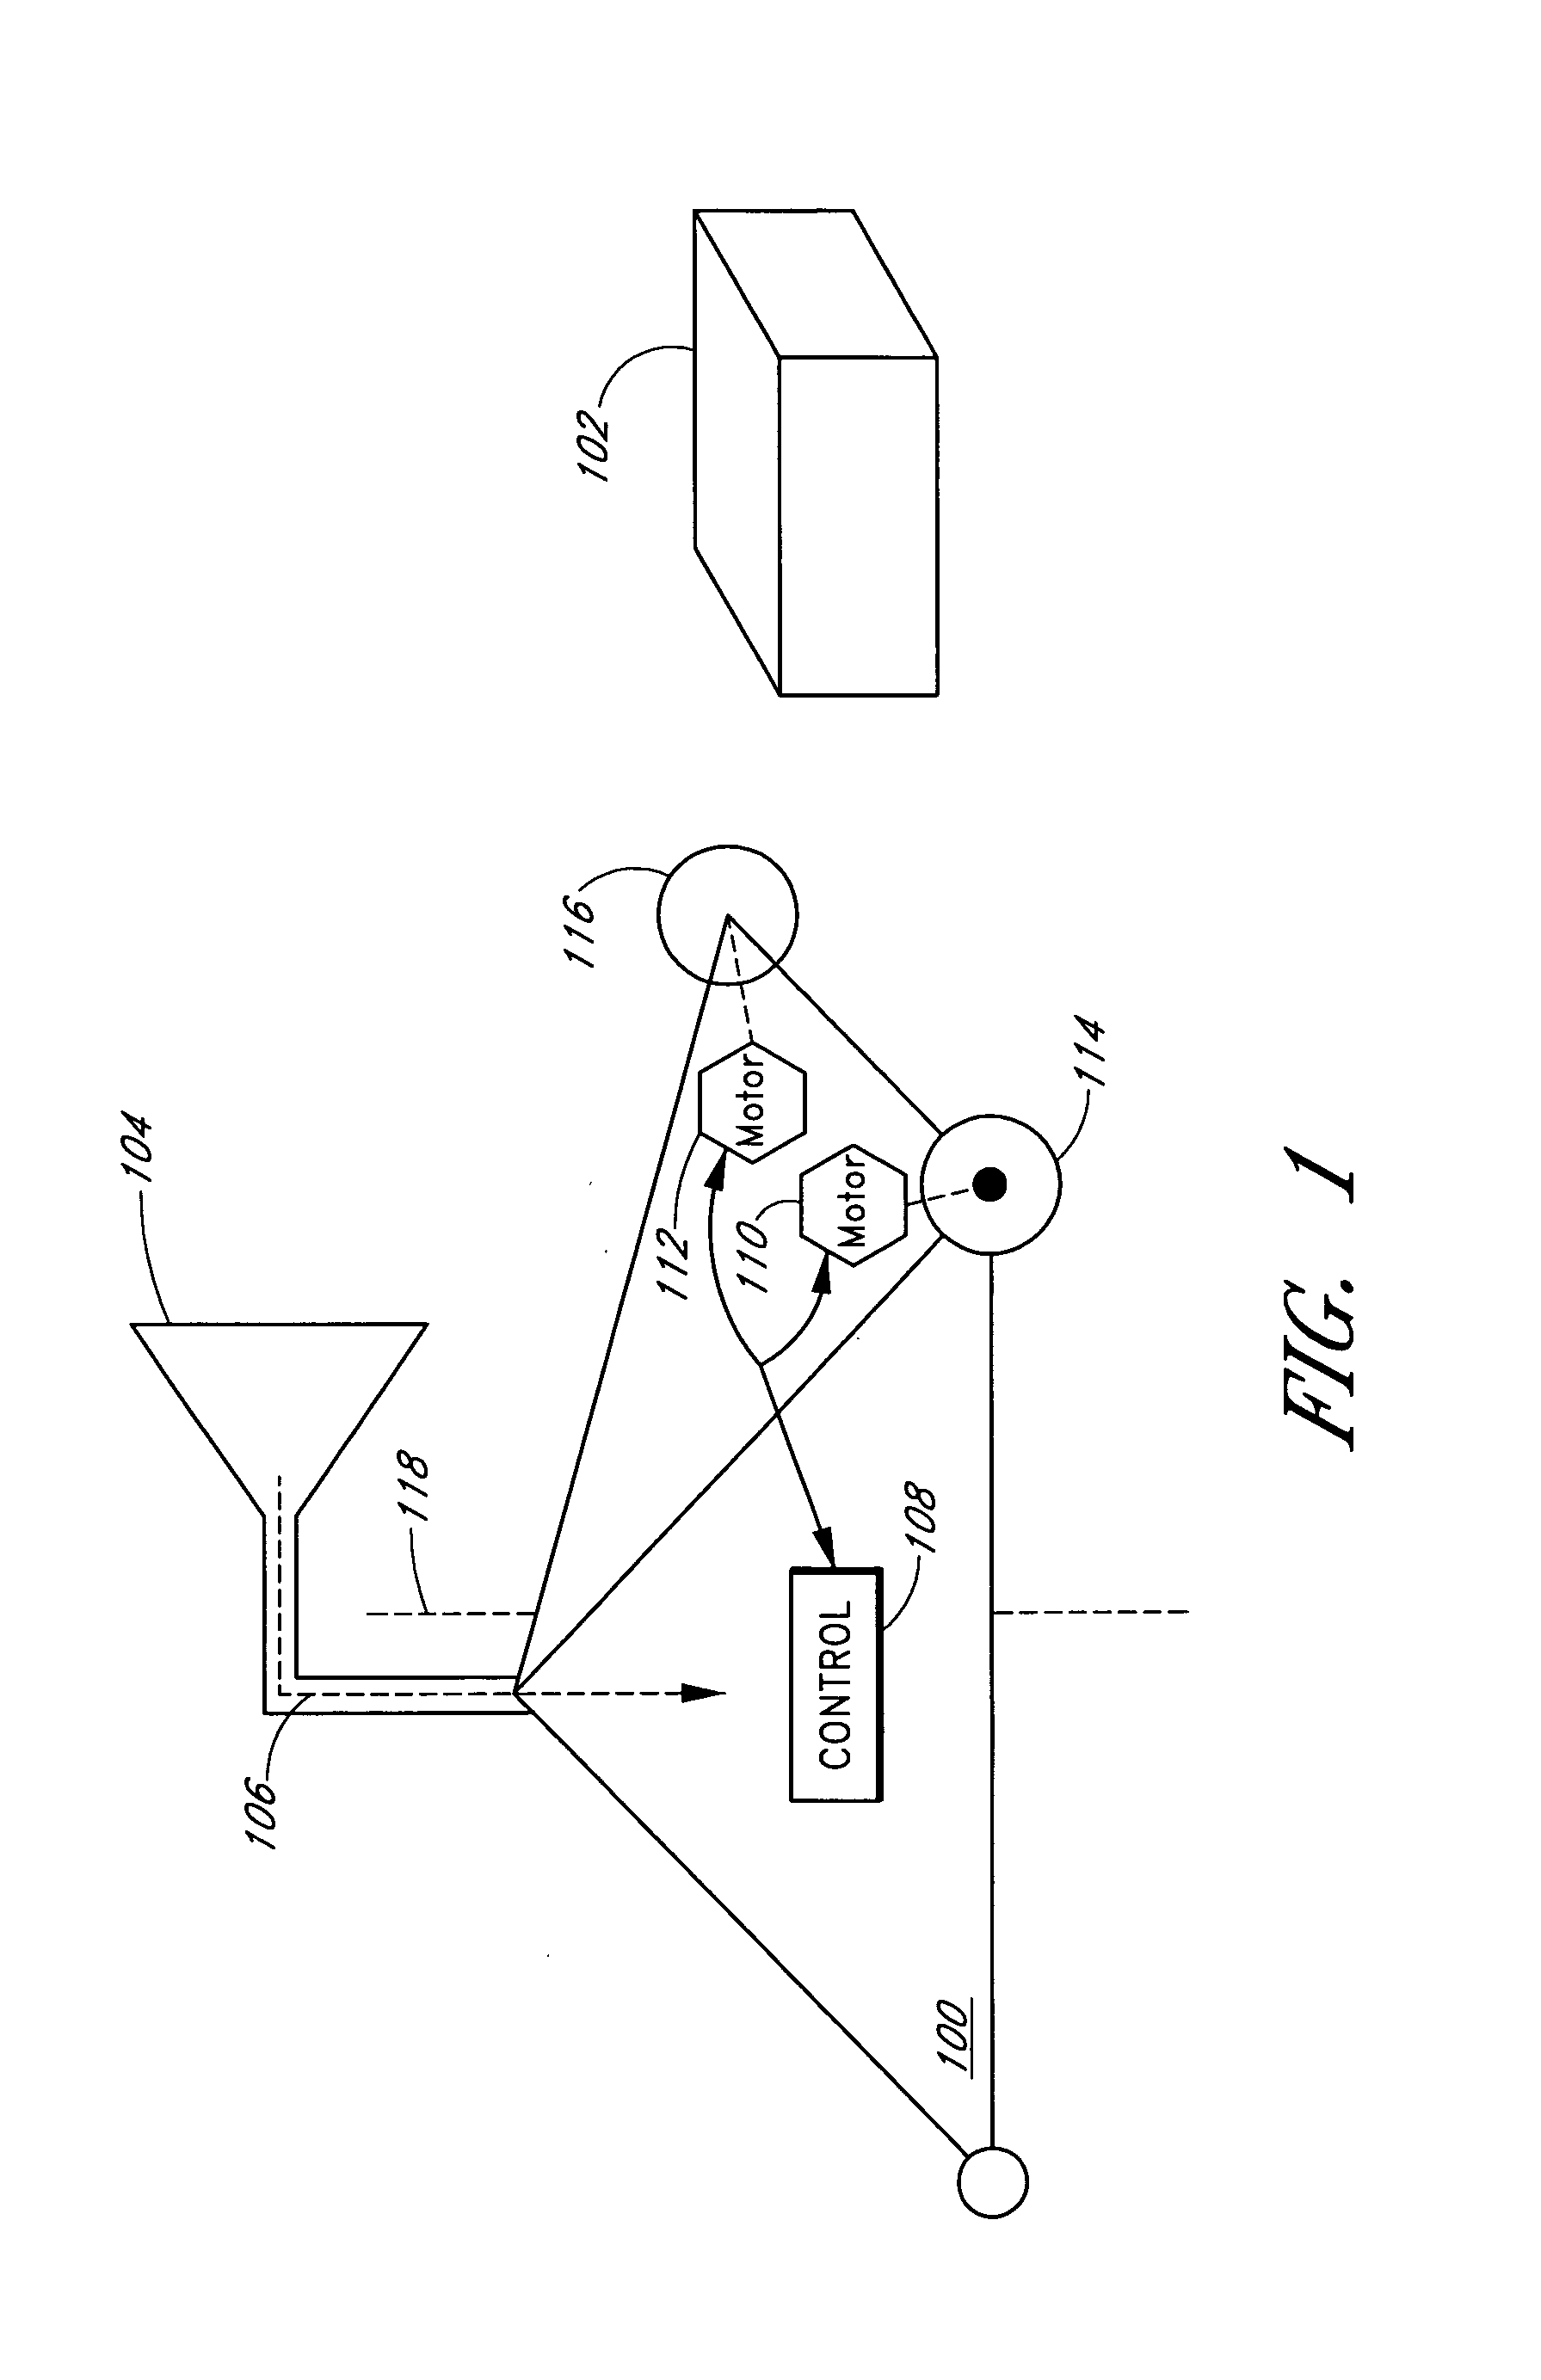 Systems and methods for the automated sensing of motion in a mobile robot using visual data